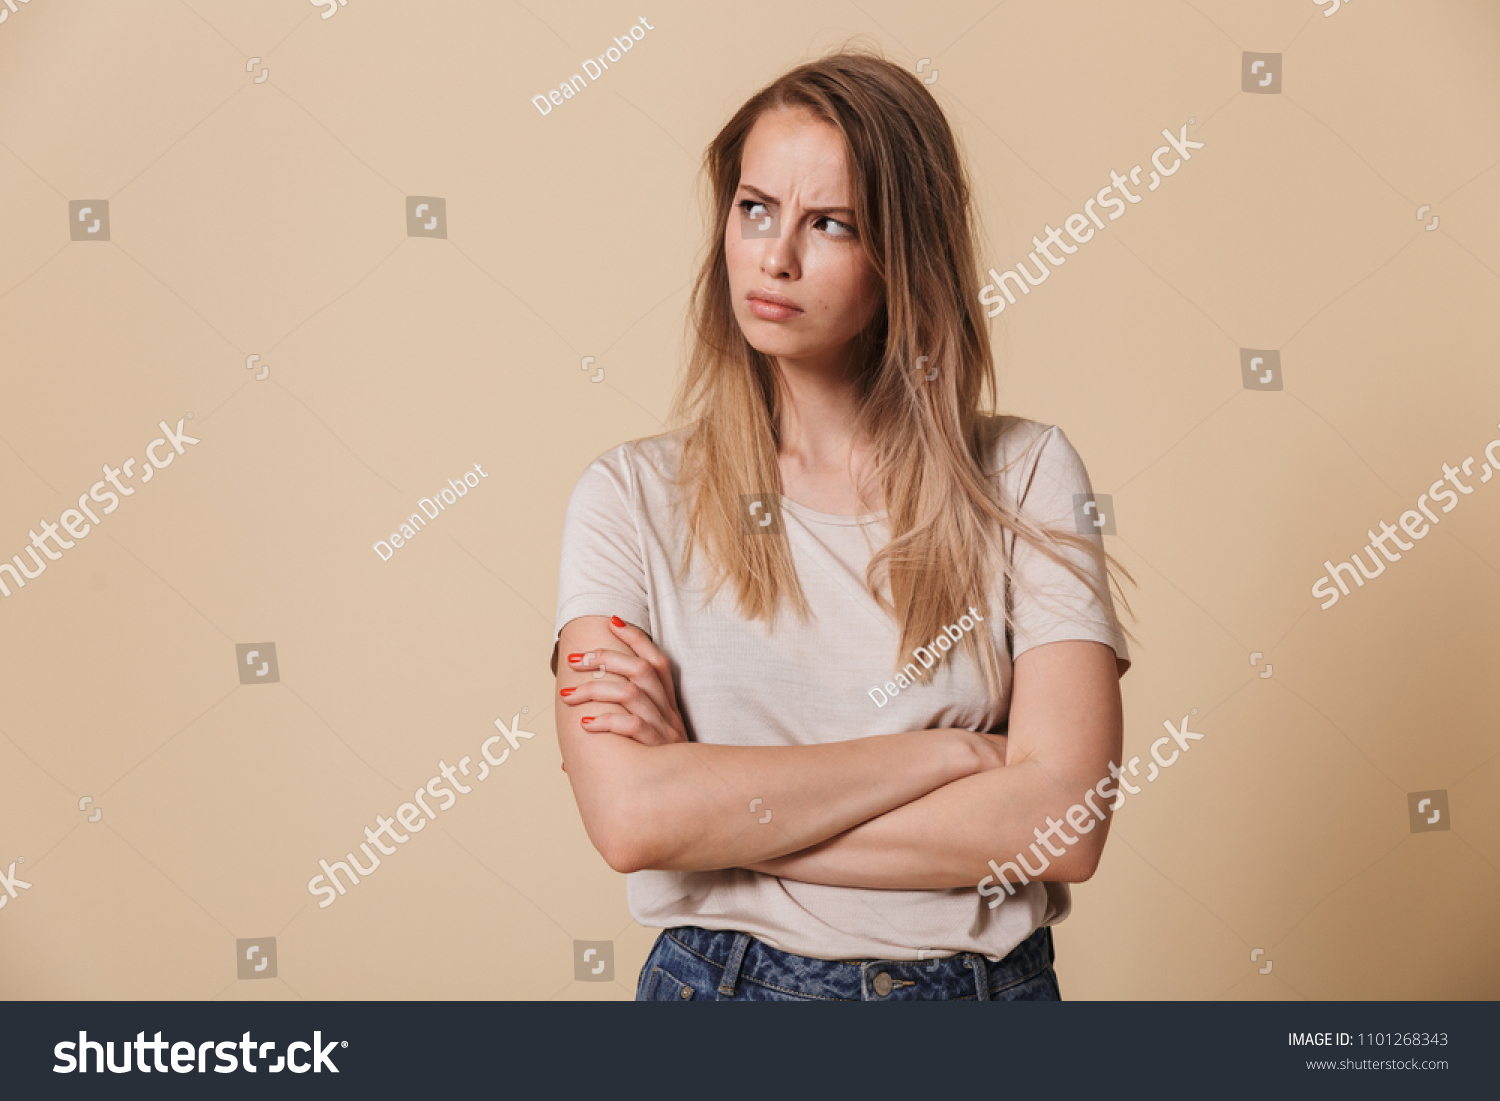 Portrait of an upset casual girl with arms folded looking away isolated over beige background #1101268343